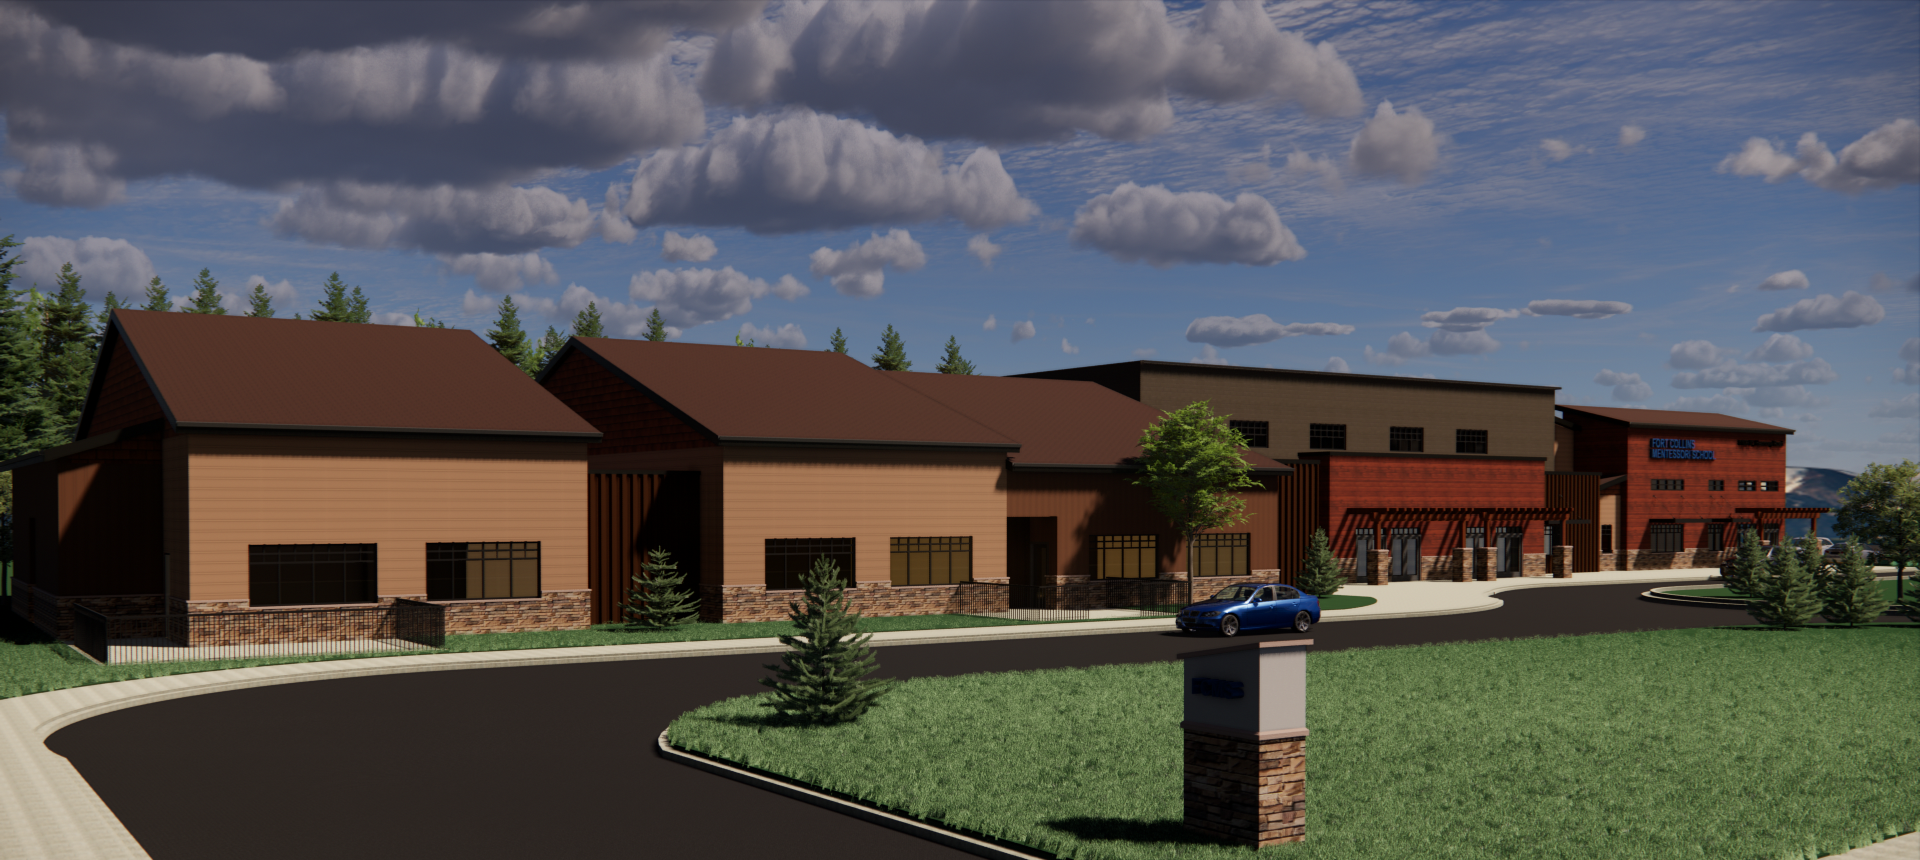 South Perspective View of Fort Collins Montessori School's new campus